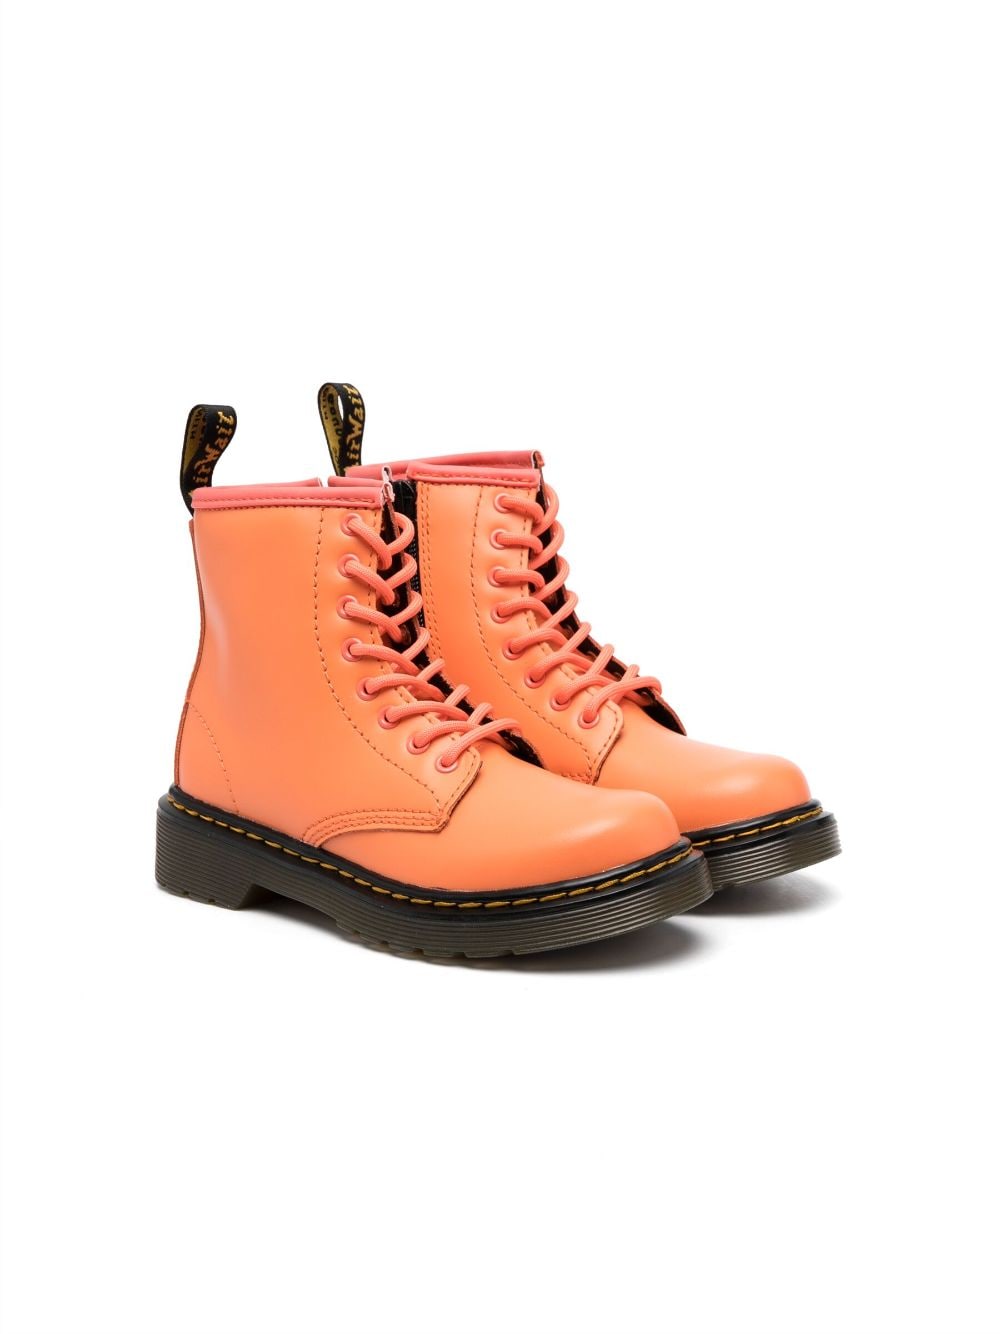 Image 1 of Dr. Martens Kids 1460 leather lace-up boots